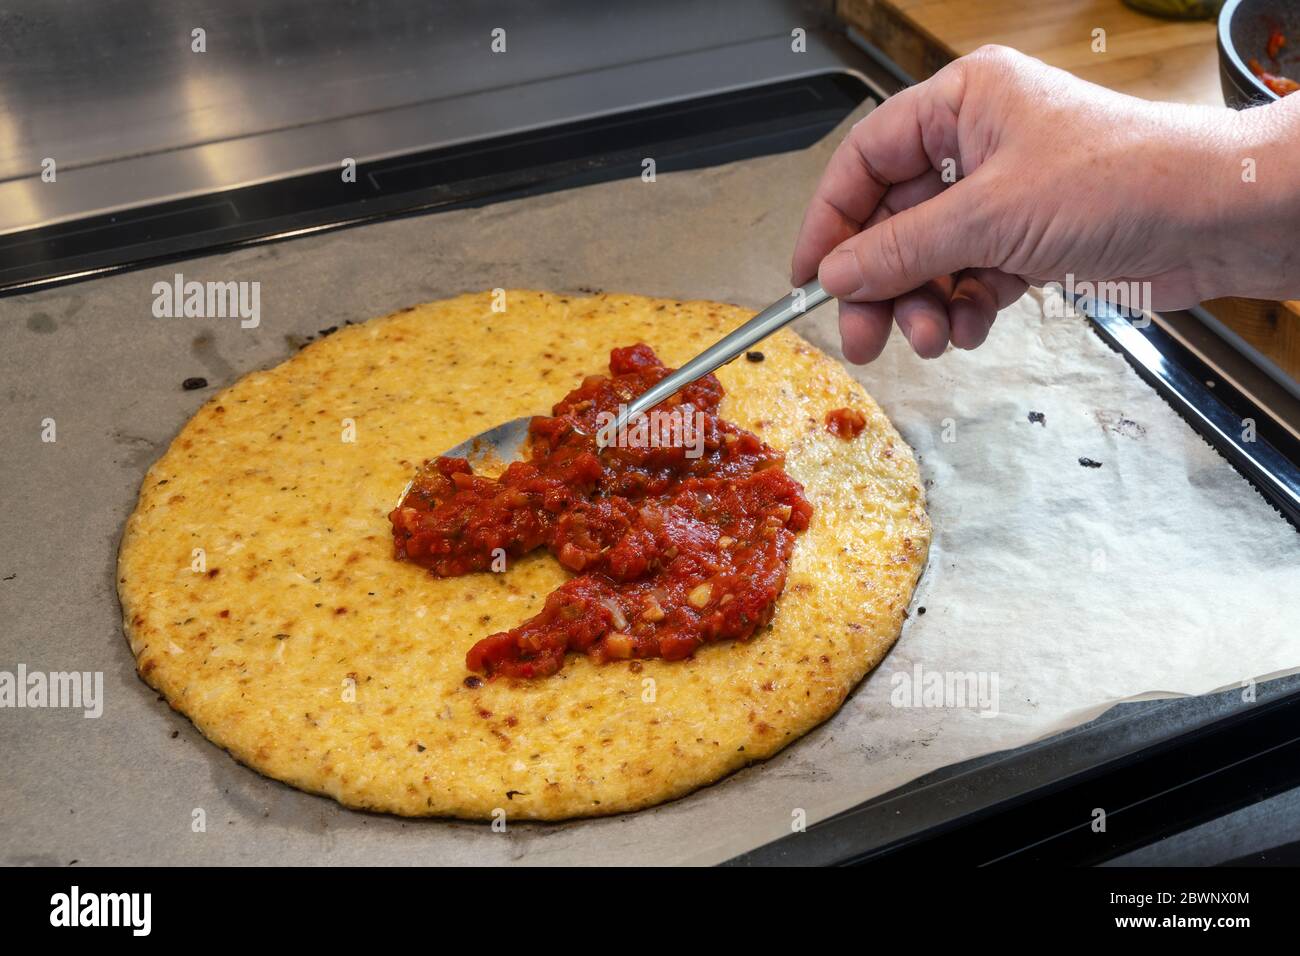 Hand is spreading tomato sauce on a pizza crust from shredded cauliflower, cooking a healthy alternative for slimming with low carb or ketogenic diet, Stock Photo